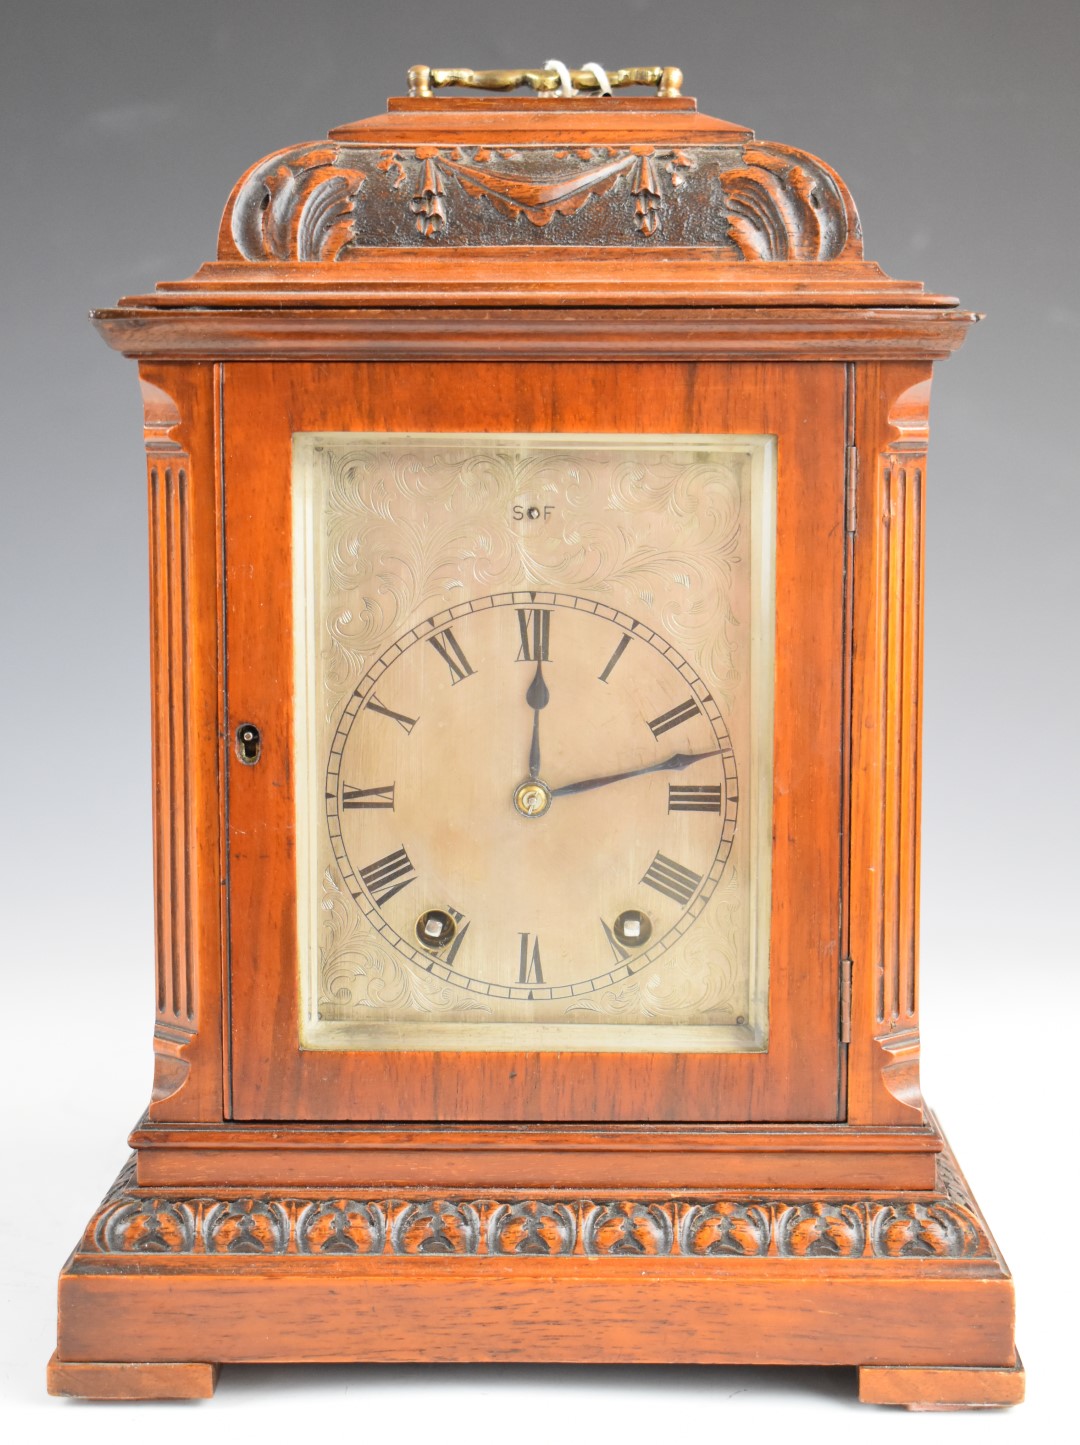 19th or early 20thC mahogany bracket clock with carved decoration, the silvered dial having slow and